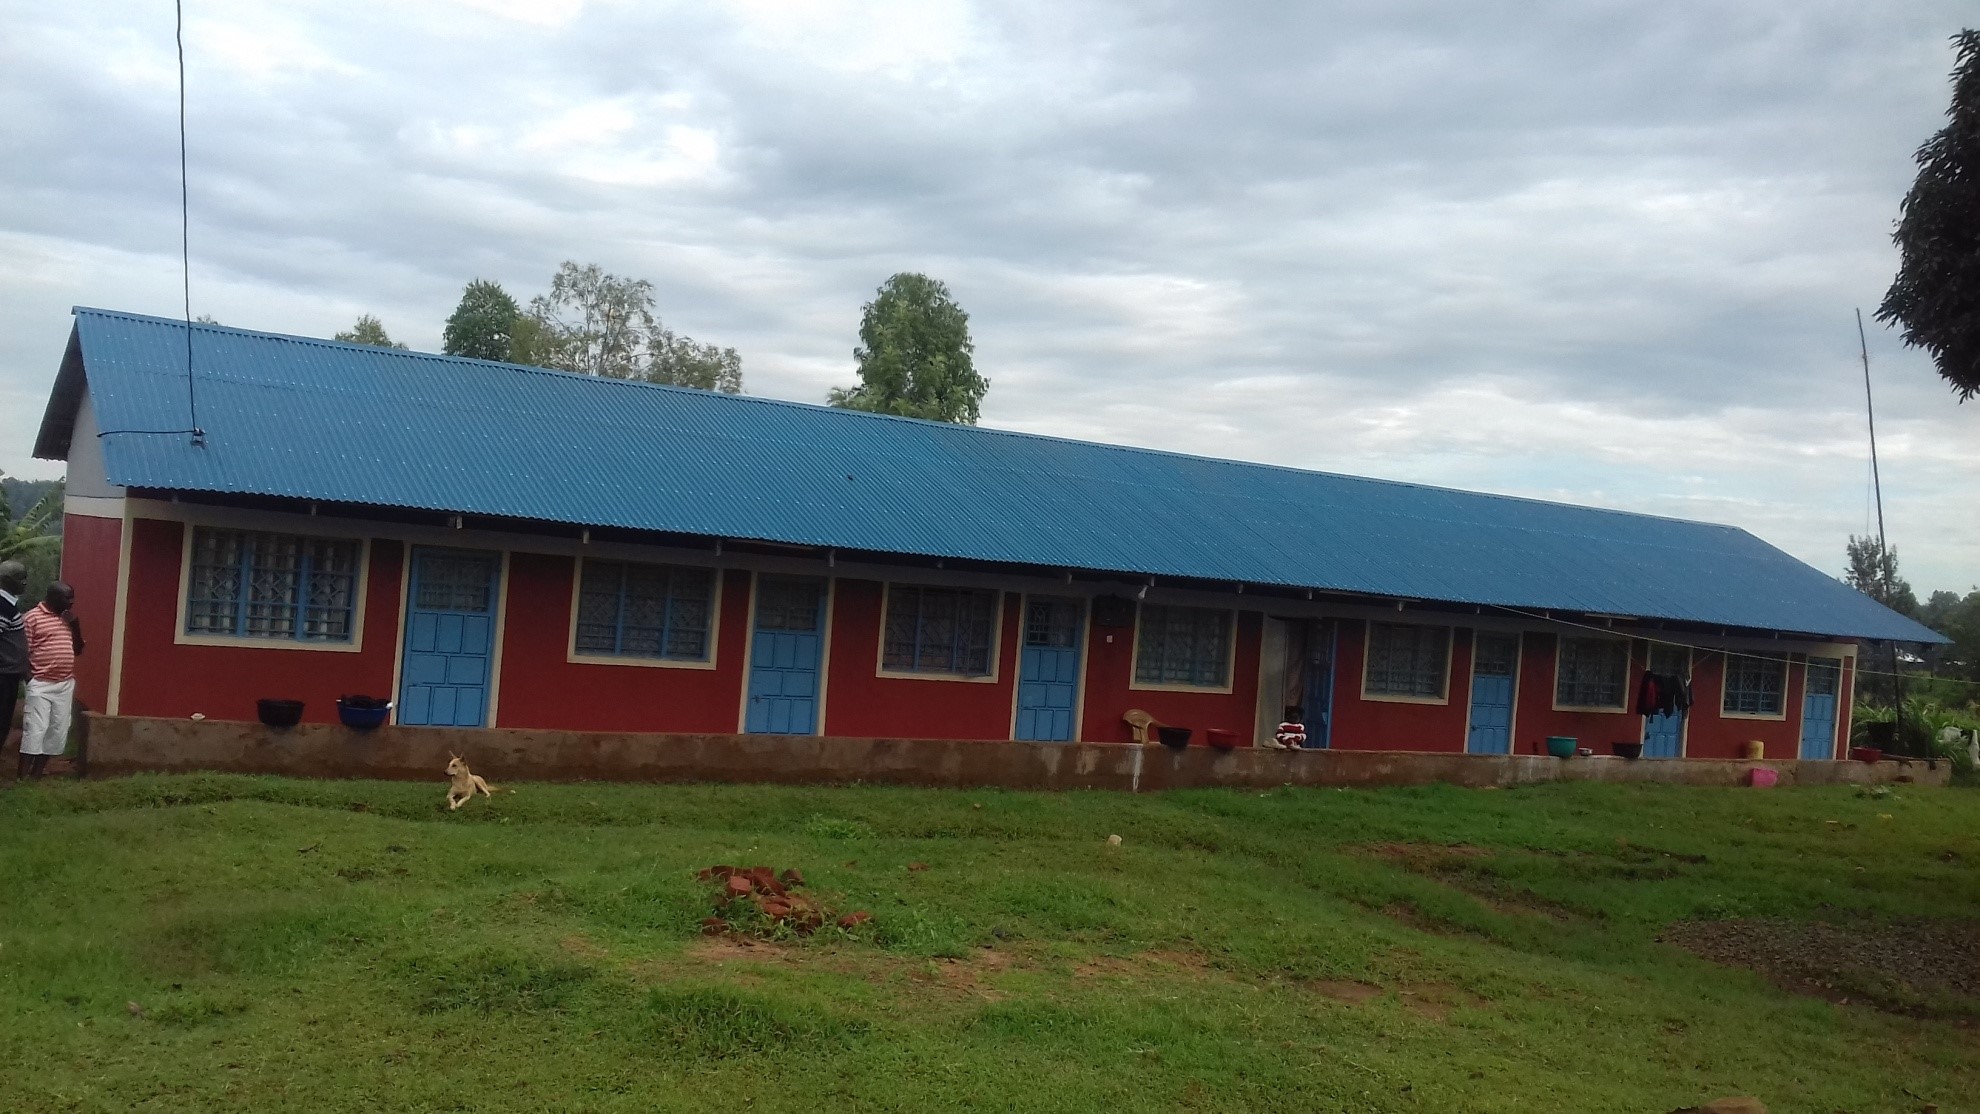 https://kitutuchache-south.ngcdf.go.ke/wp-content/uploads/2021/08/KITUTU-CHACHE-SOUTH-NG-CDF-PROJECT-7-UNITS-OF-STAFF-HOUSES-CONSTRUCTED-BY-NG-CDF-AT-RUGA-AP.-LINE.jpg